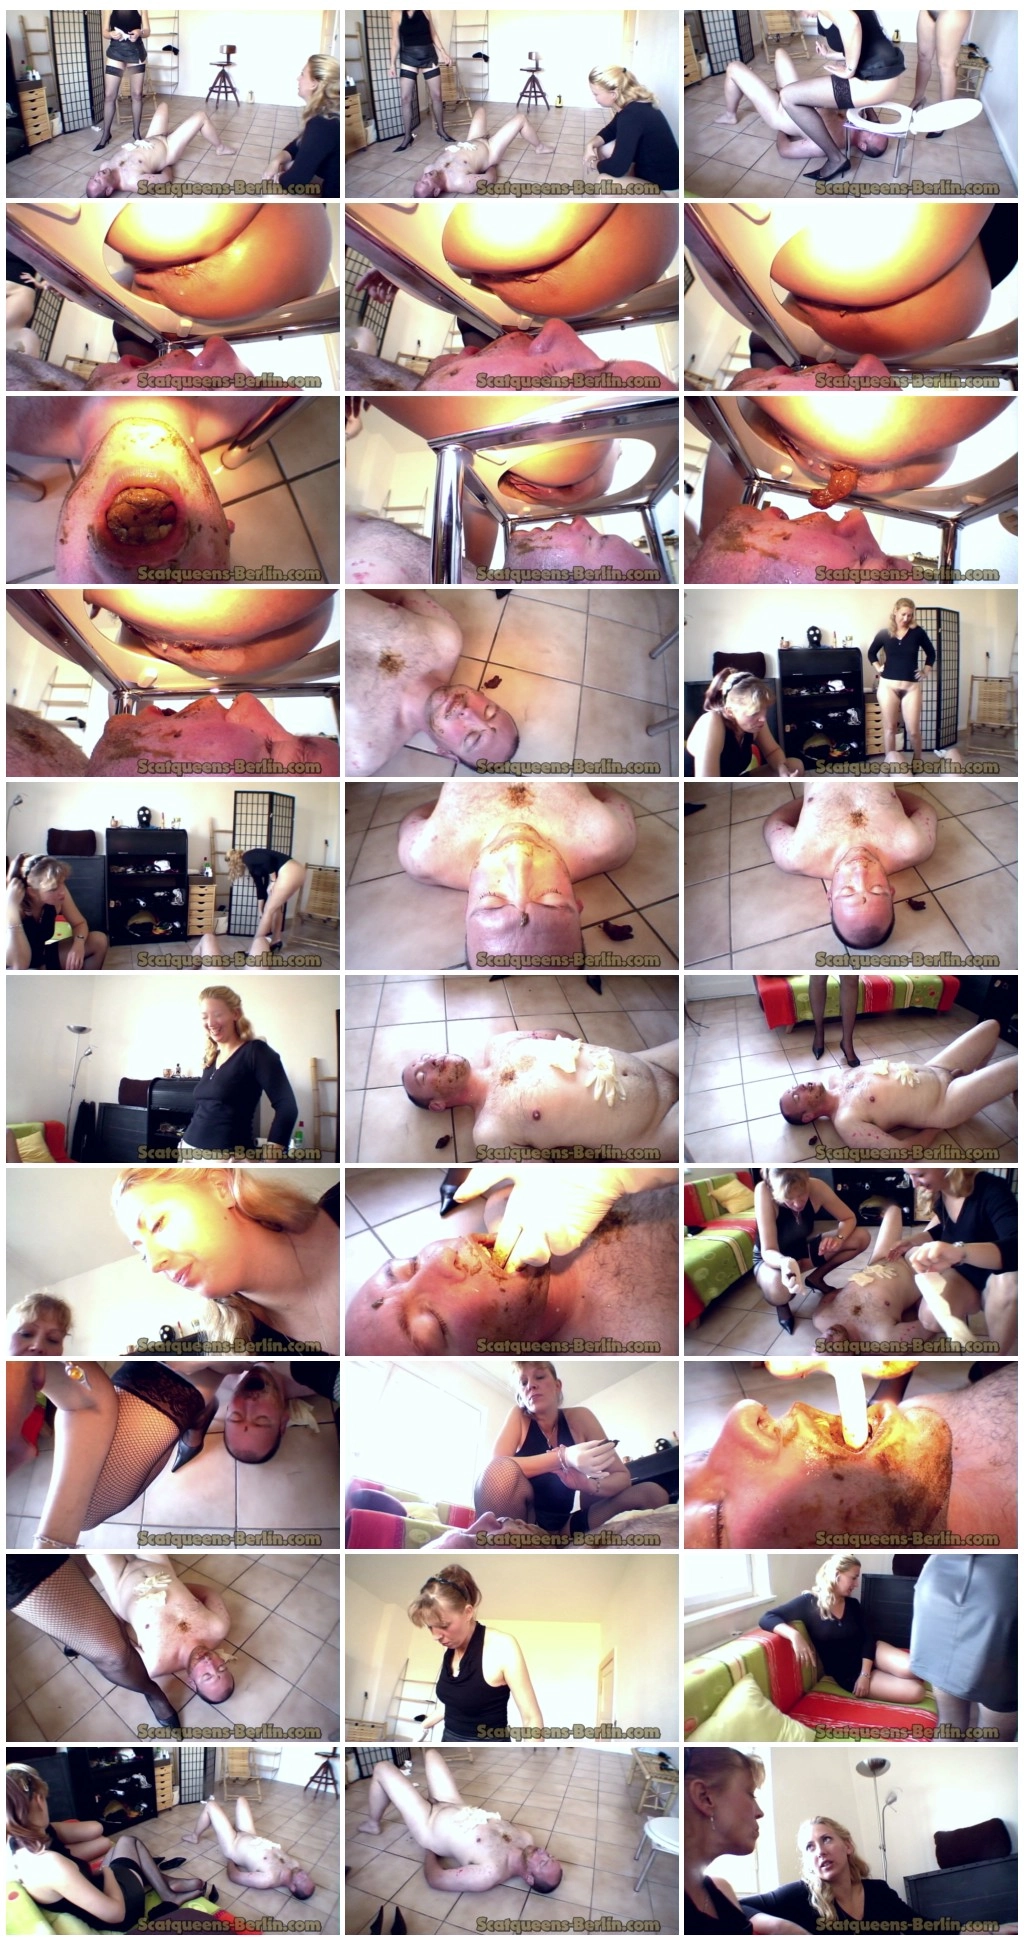 Toilet Slave Works P3 [Scat, pissing, shit, defecation, Femdom ,Toilet Slavery,Smearing, Face shit,Fingering,Domination, Eat shit , Humiliations,Licking, Drink pee,spitting]